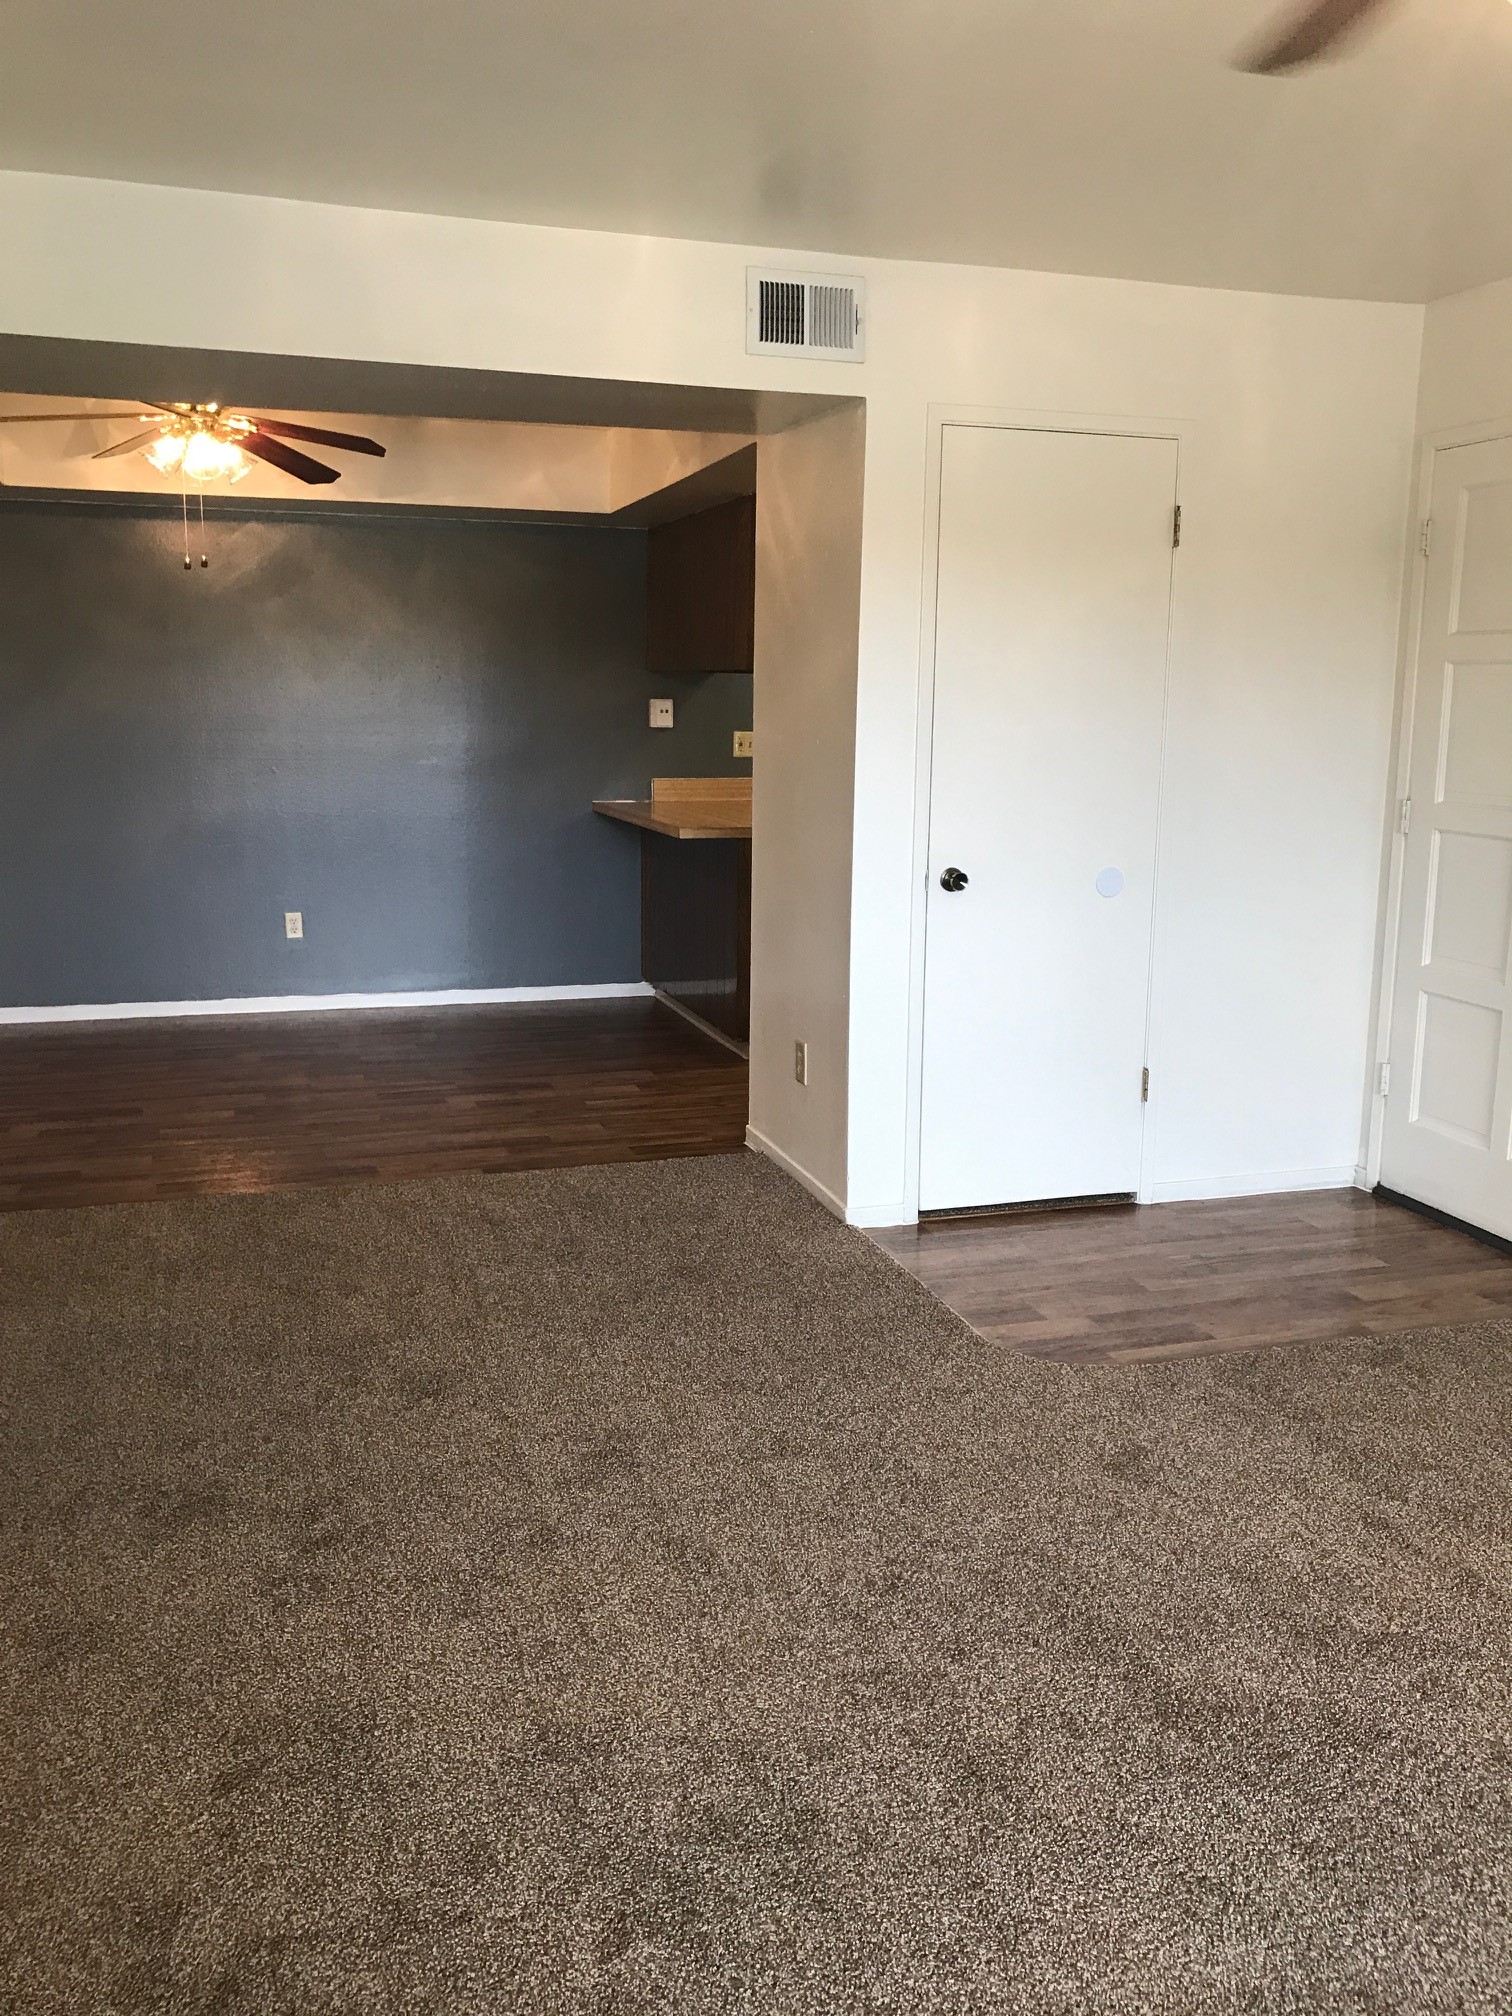 Vacant apartment with wooden and carpeted floors